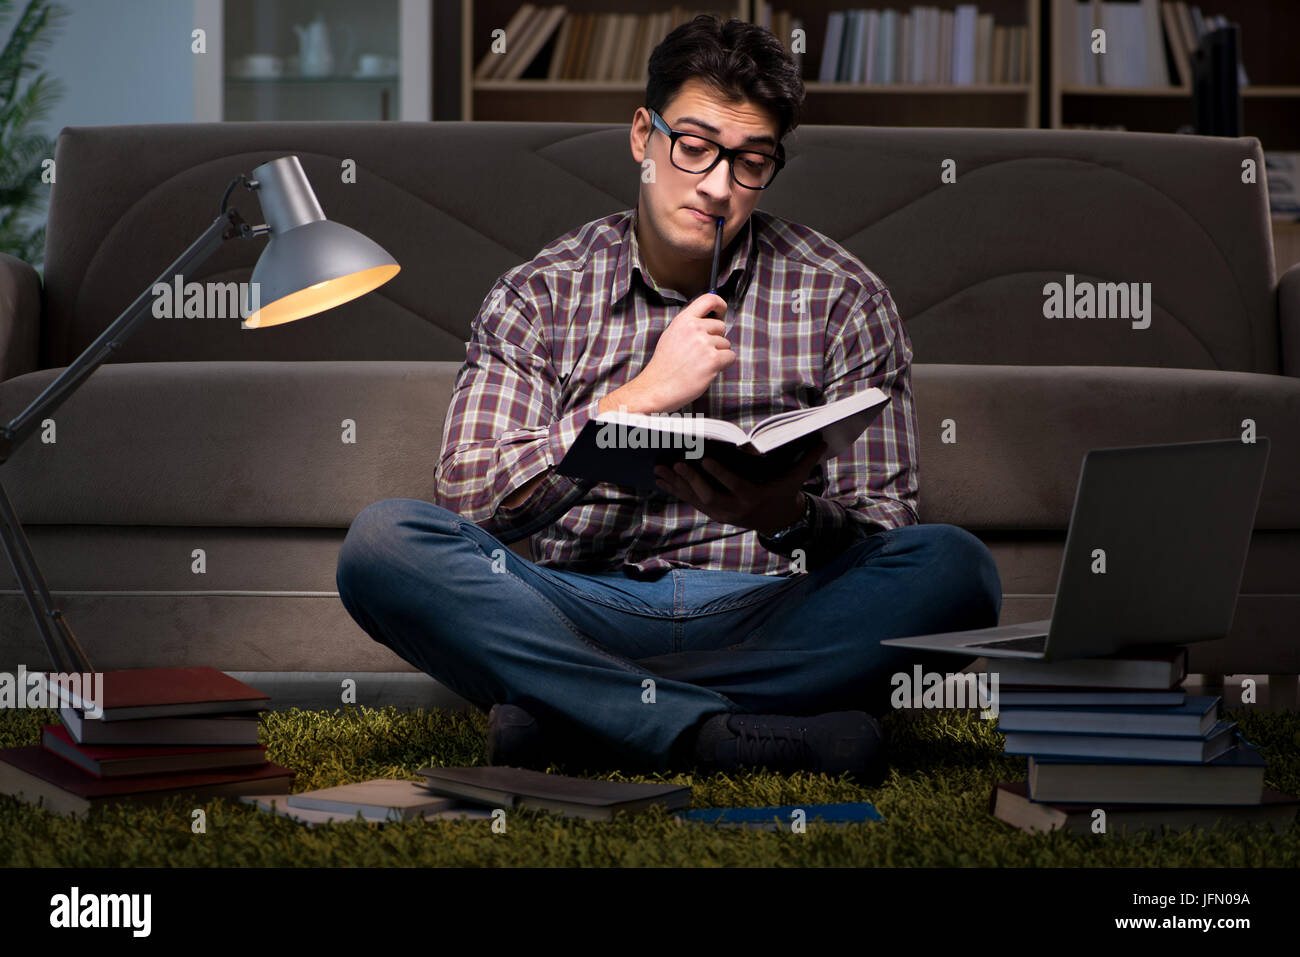 The student reading books preparing for exams Stock Photo